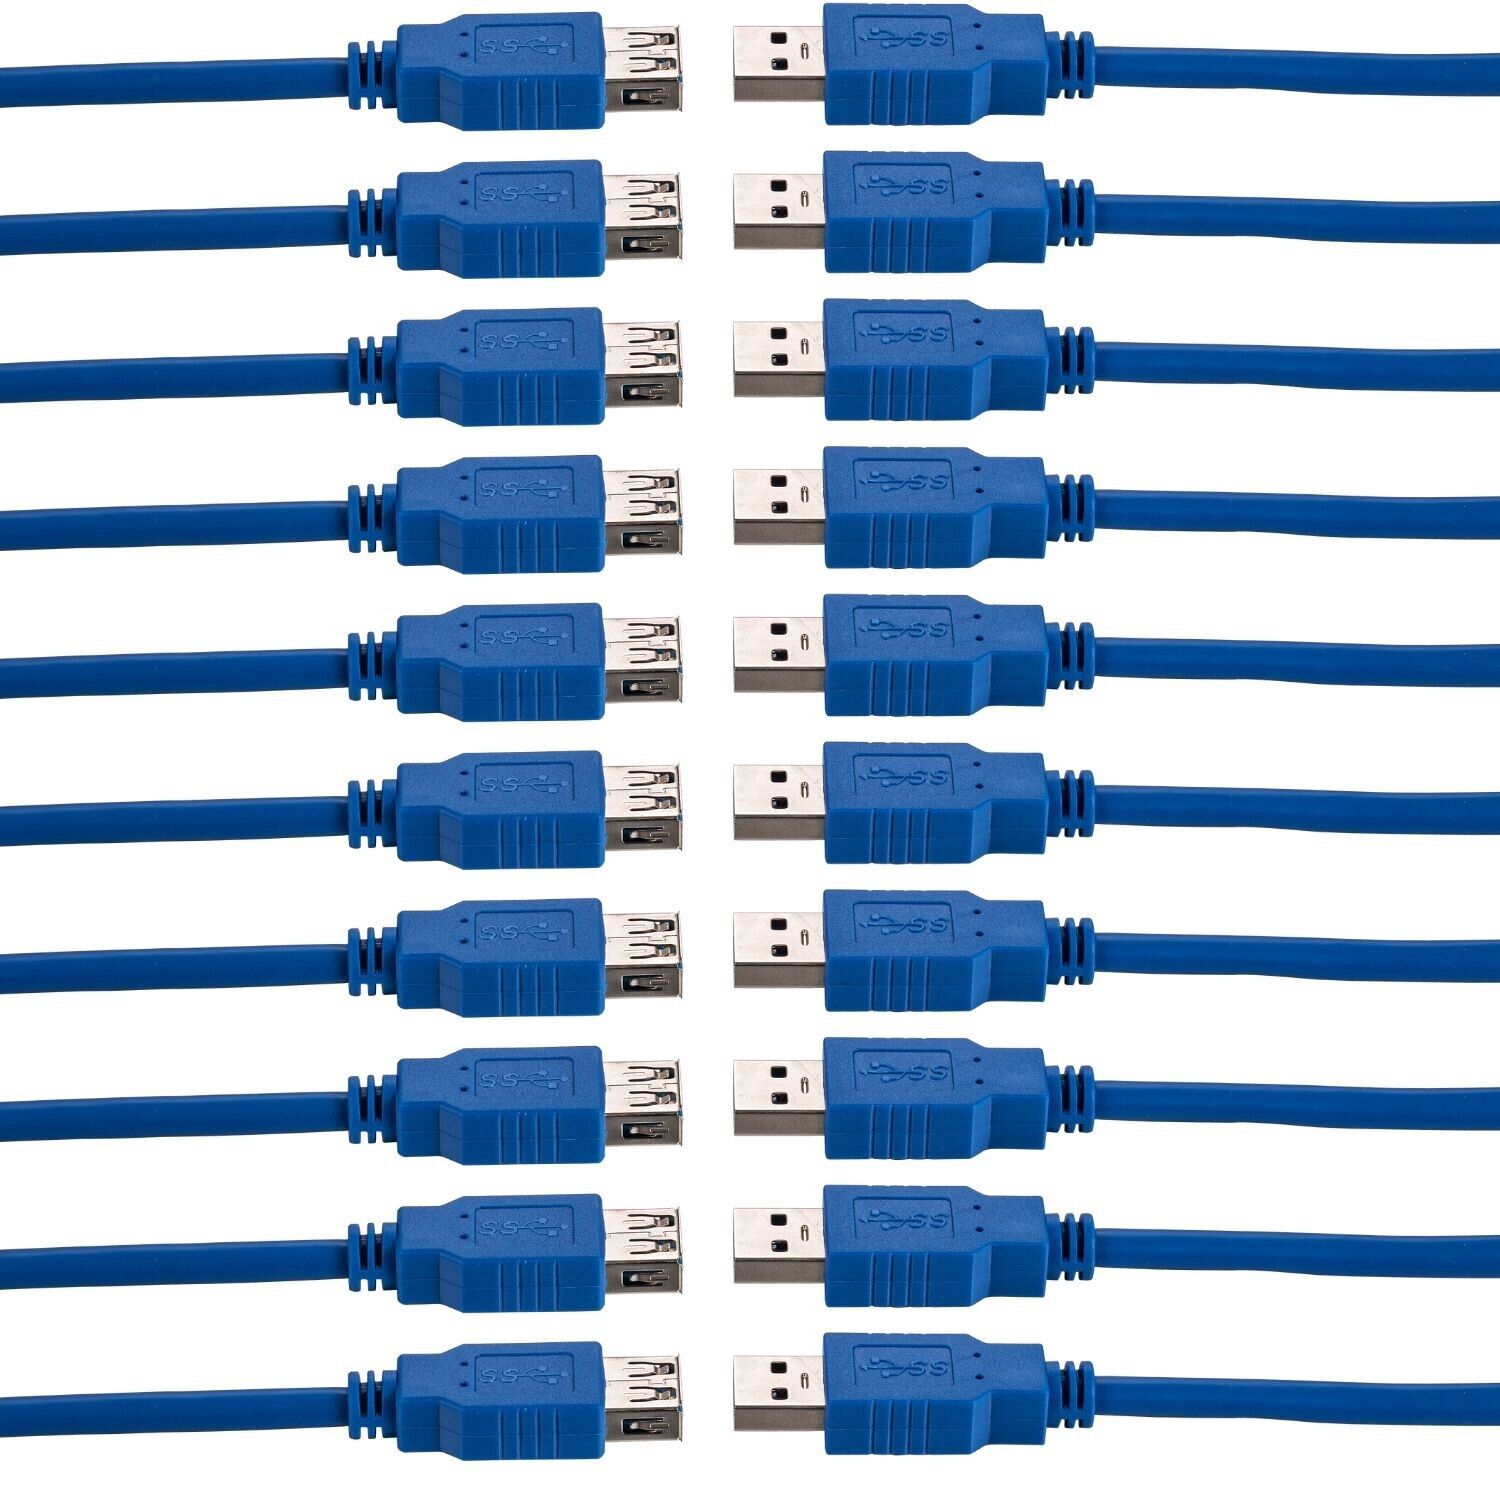 10x 3ft USB 3.0 Extension Cable Type A Male to A Female Extender HIGH SPEED Blue